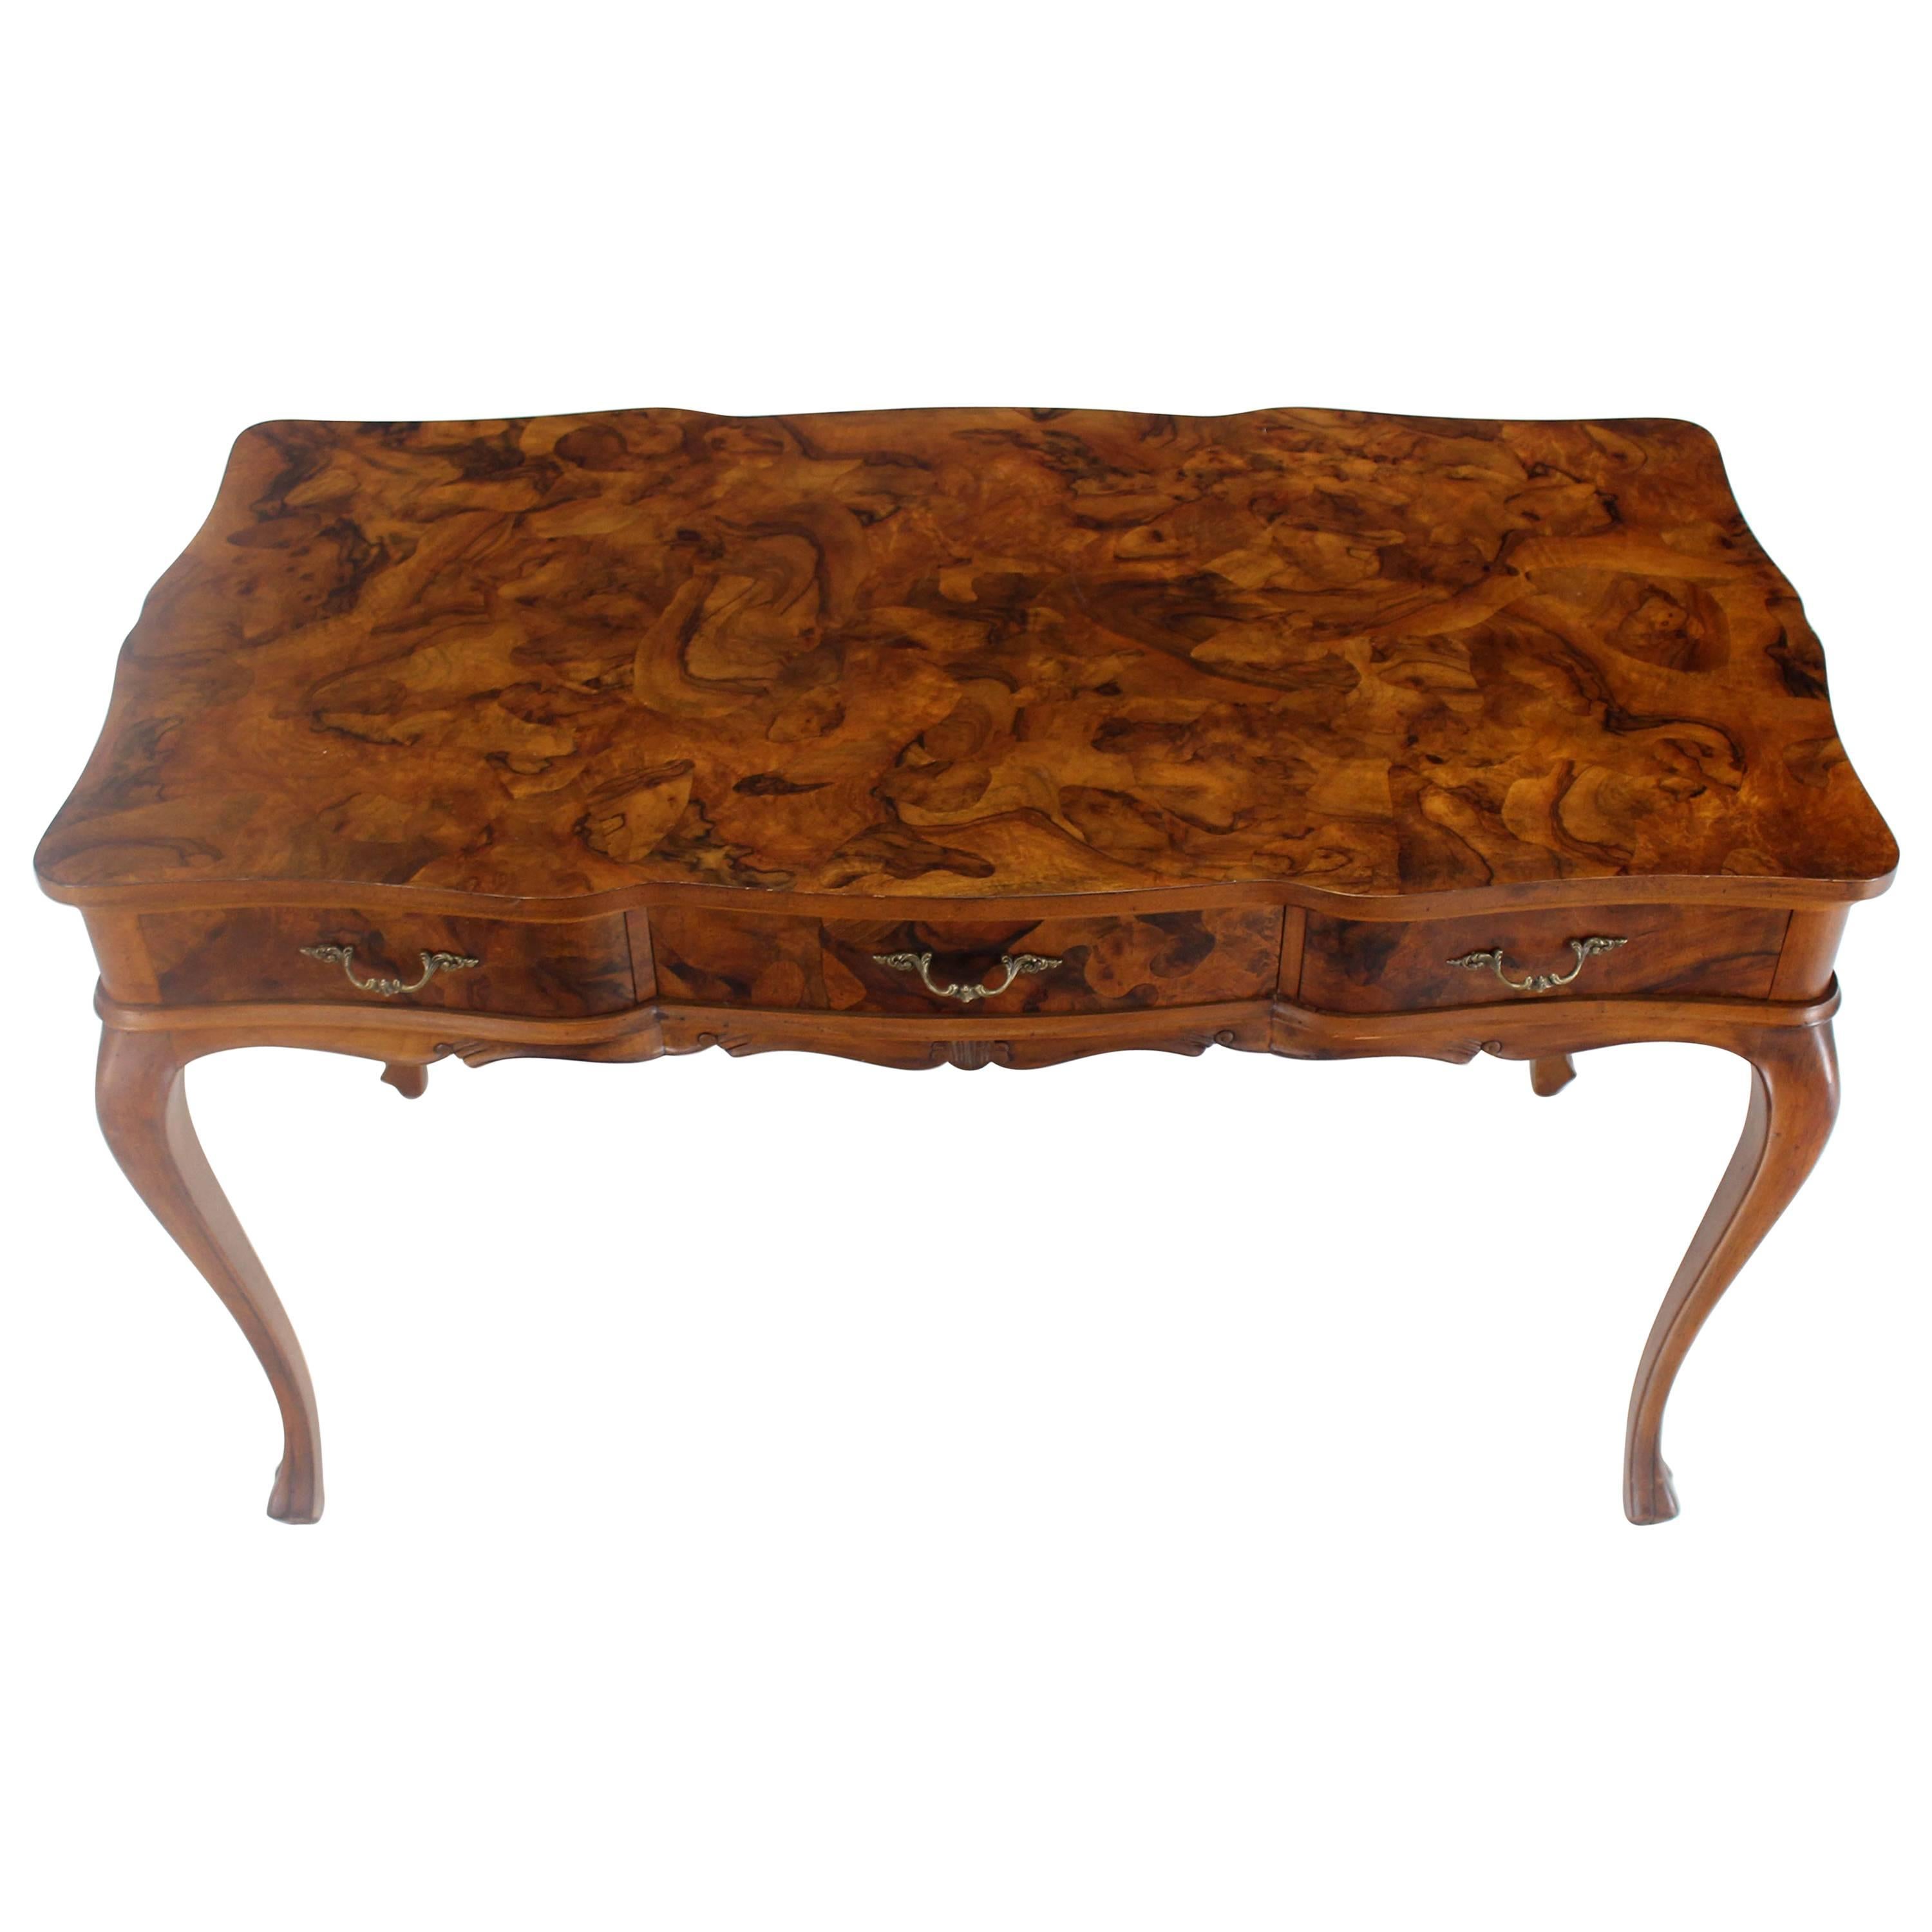 Patch Burl Wood Work Medium Size Low Profile Floating Desk Writing Table Drawers